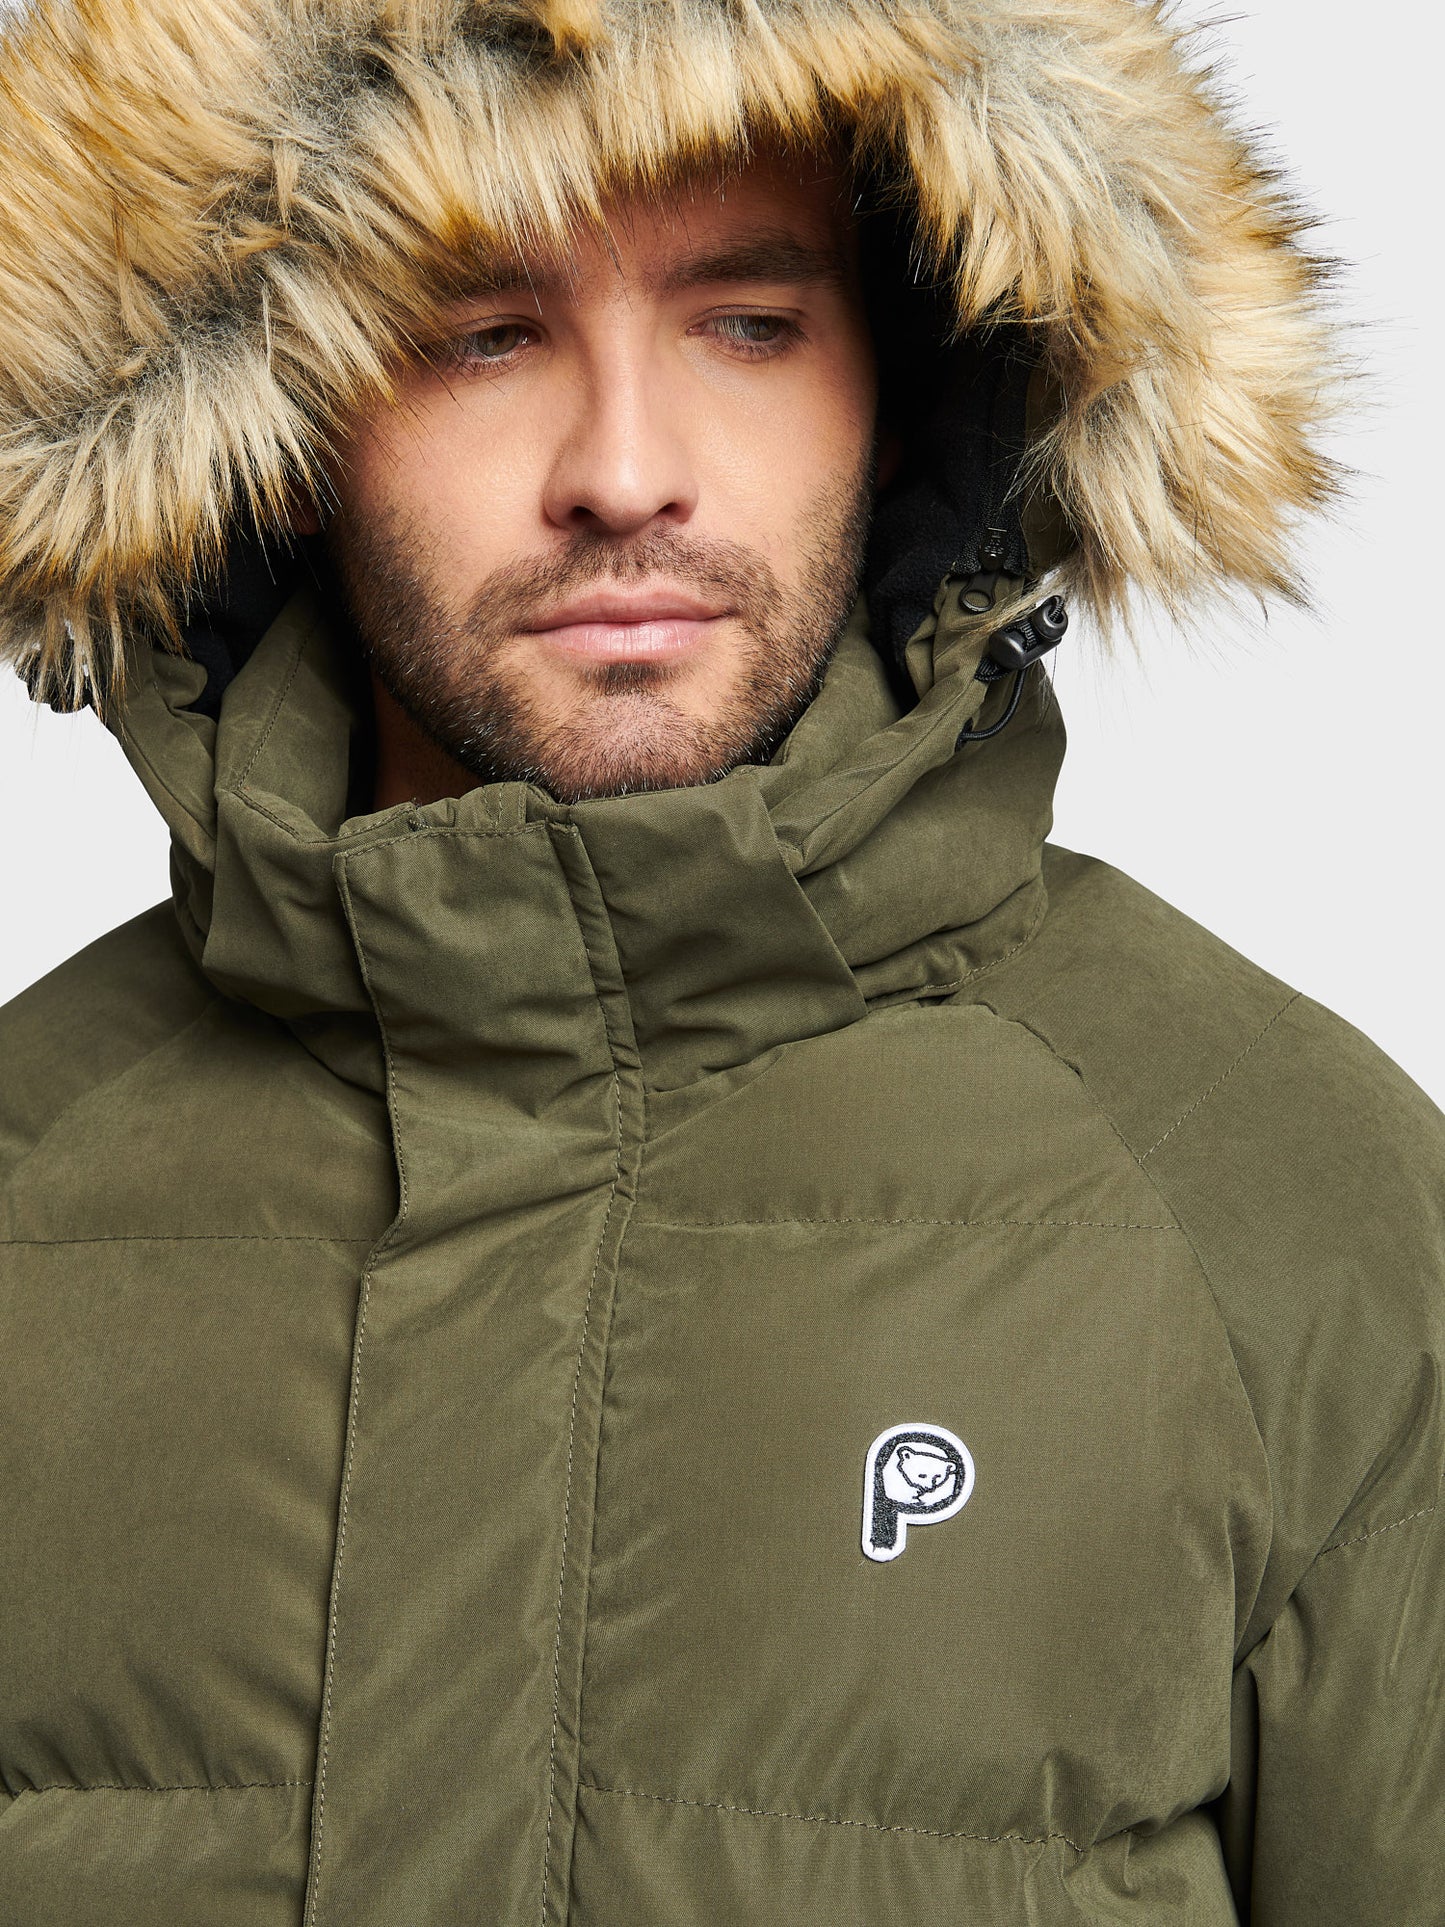 P Bear Puffer Jacket in Forest Night